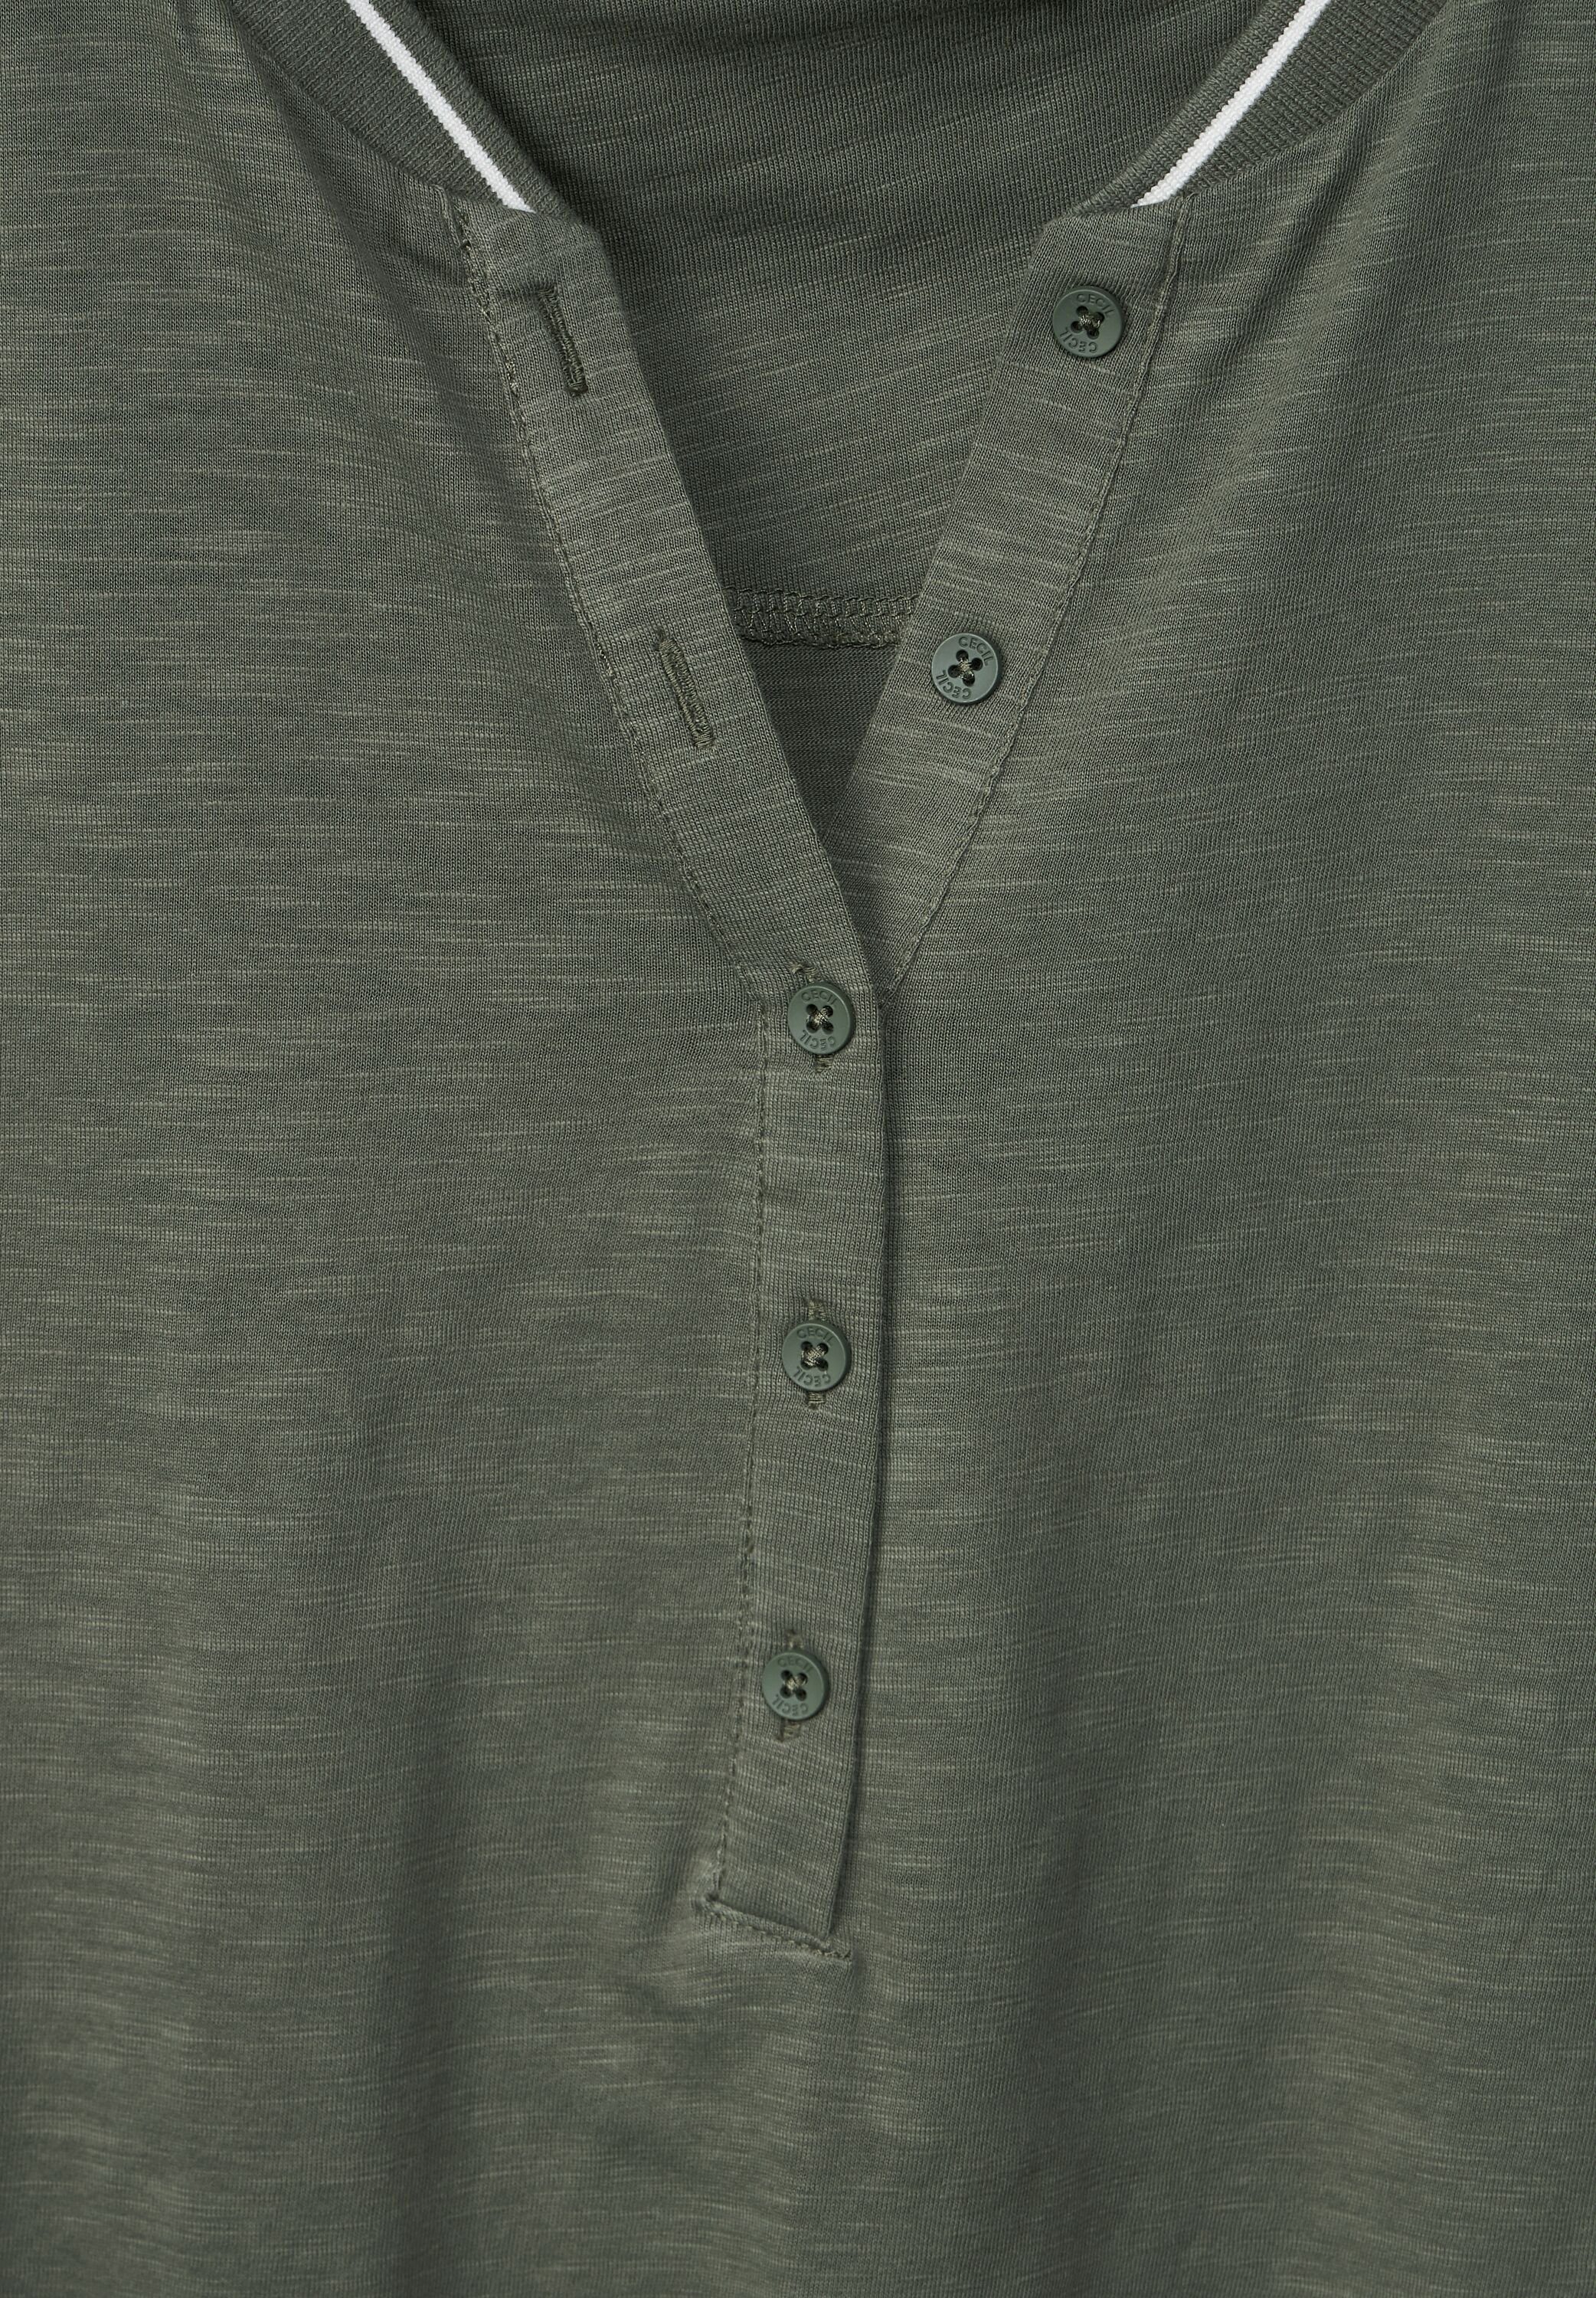 Cecil in desert green 3/4-Arm-Shirt Unifarbe olive